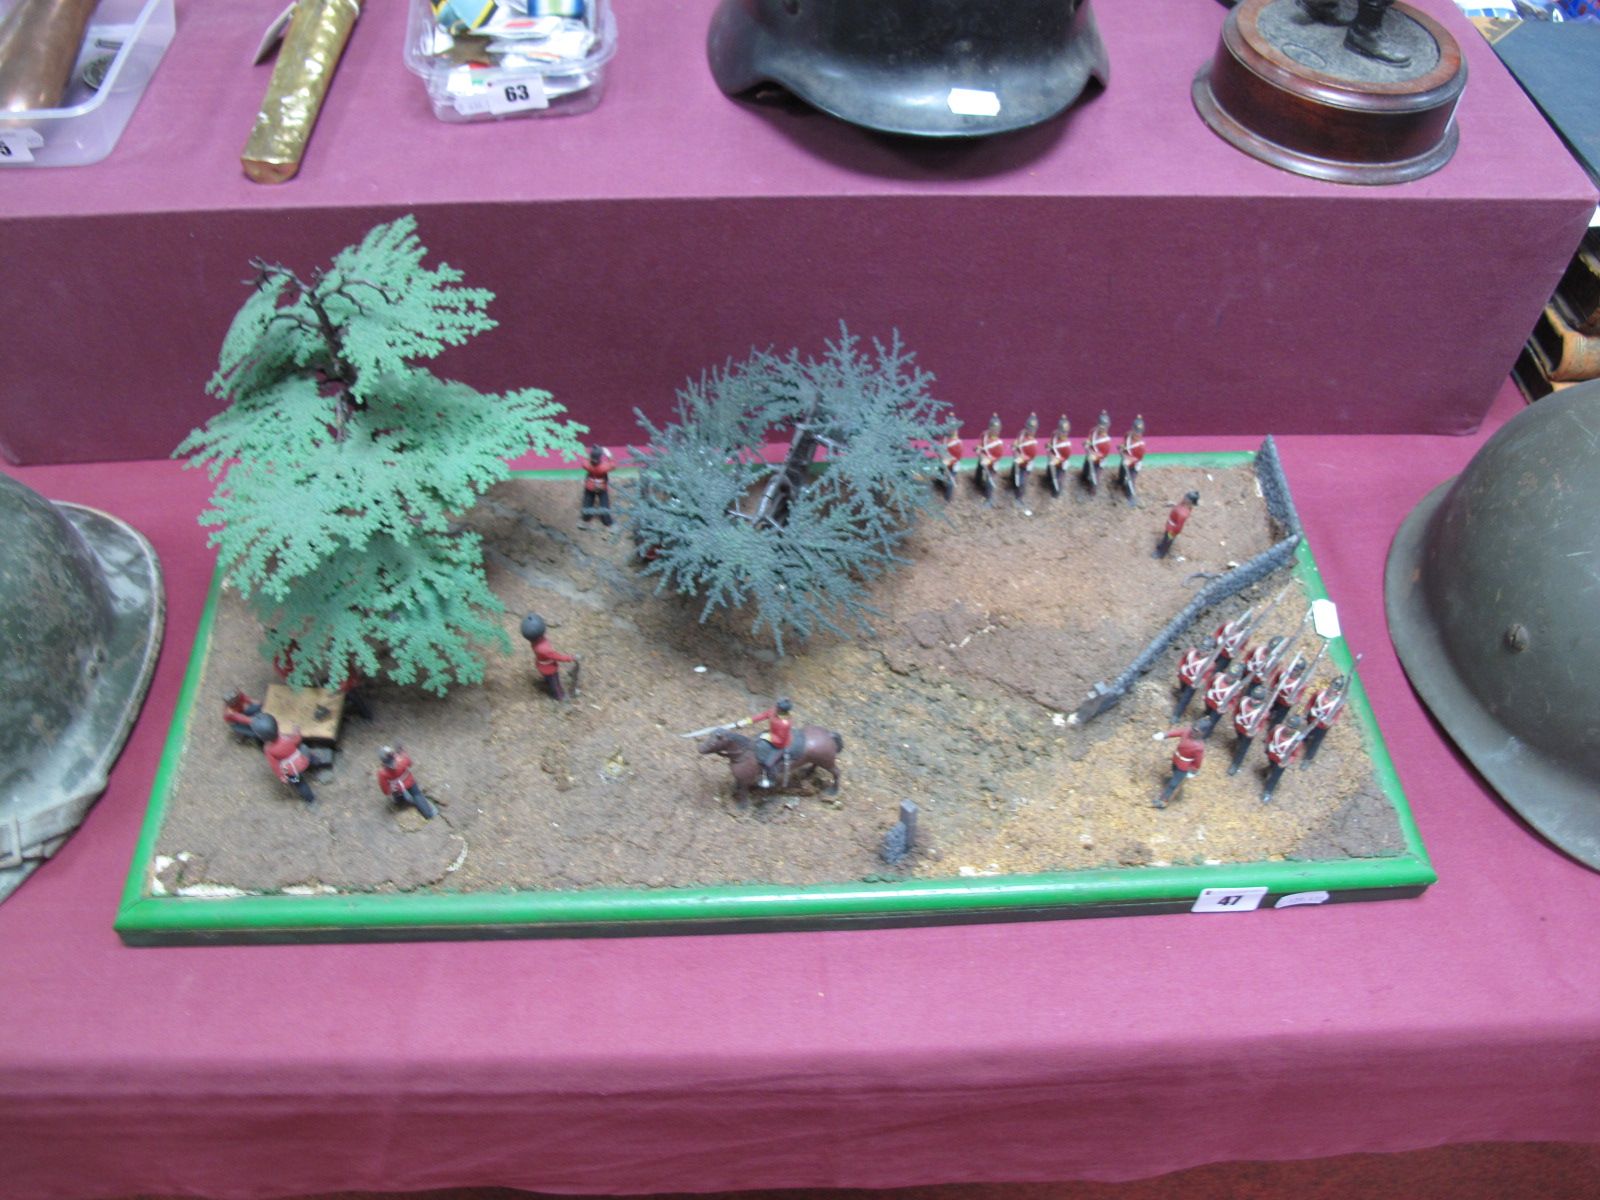 A Military Modeler's Diorama, using mainly Britains soldiers of the line. Approximately twenty